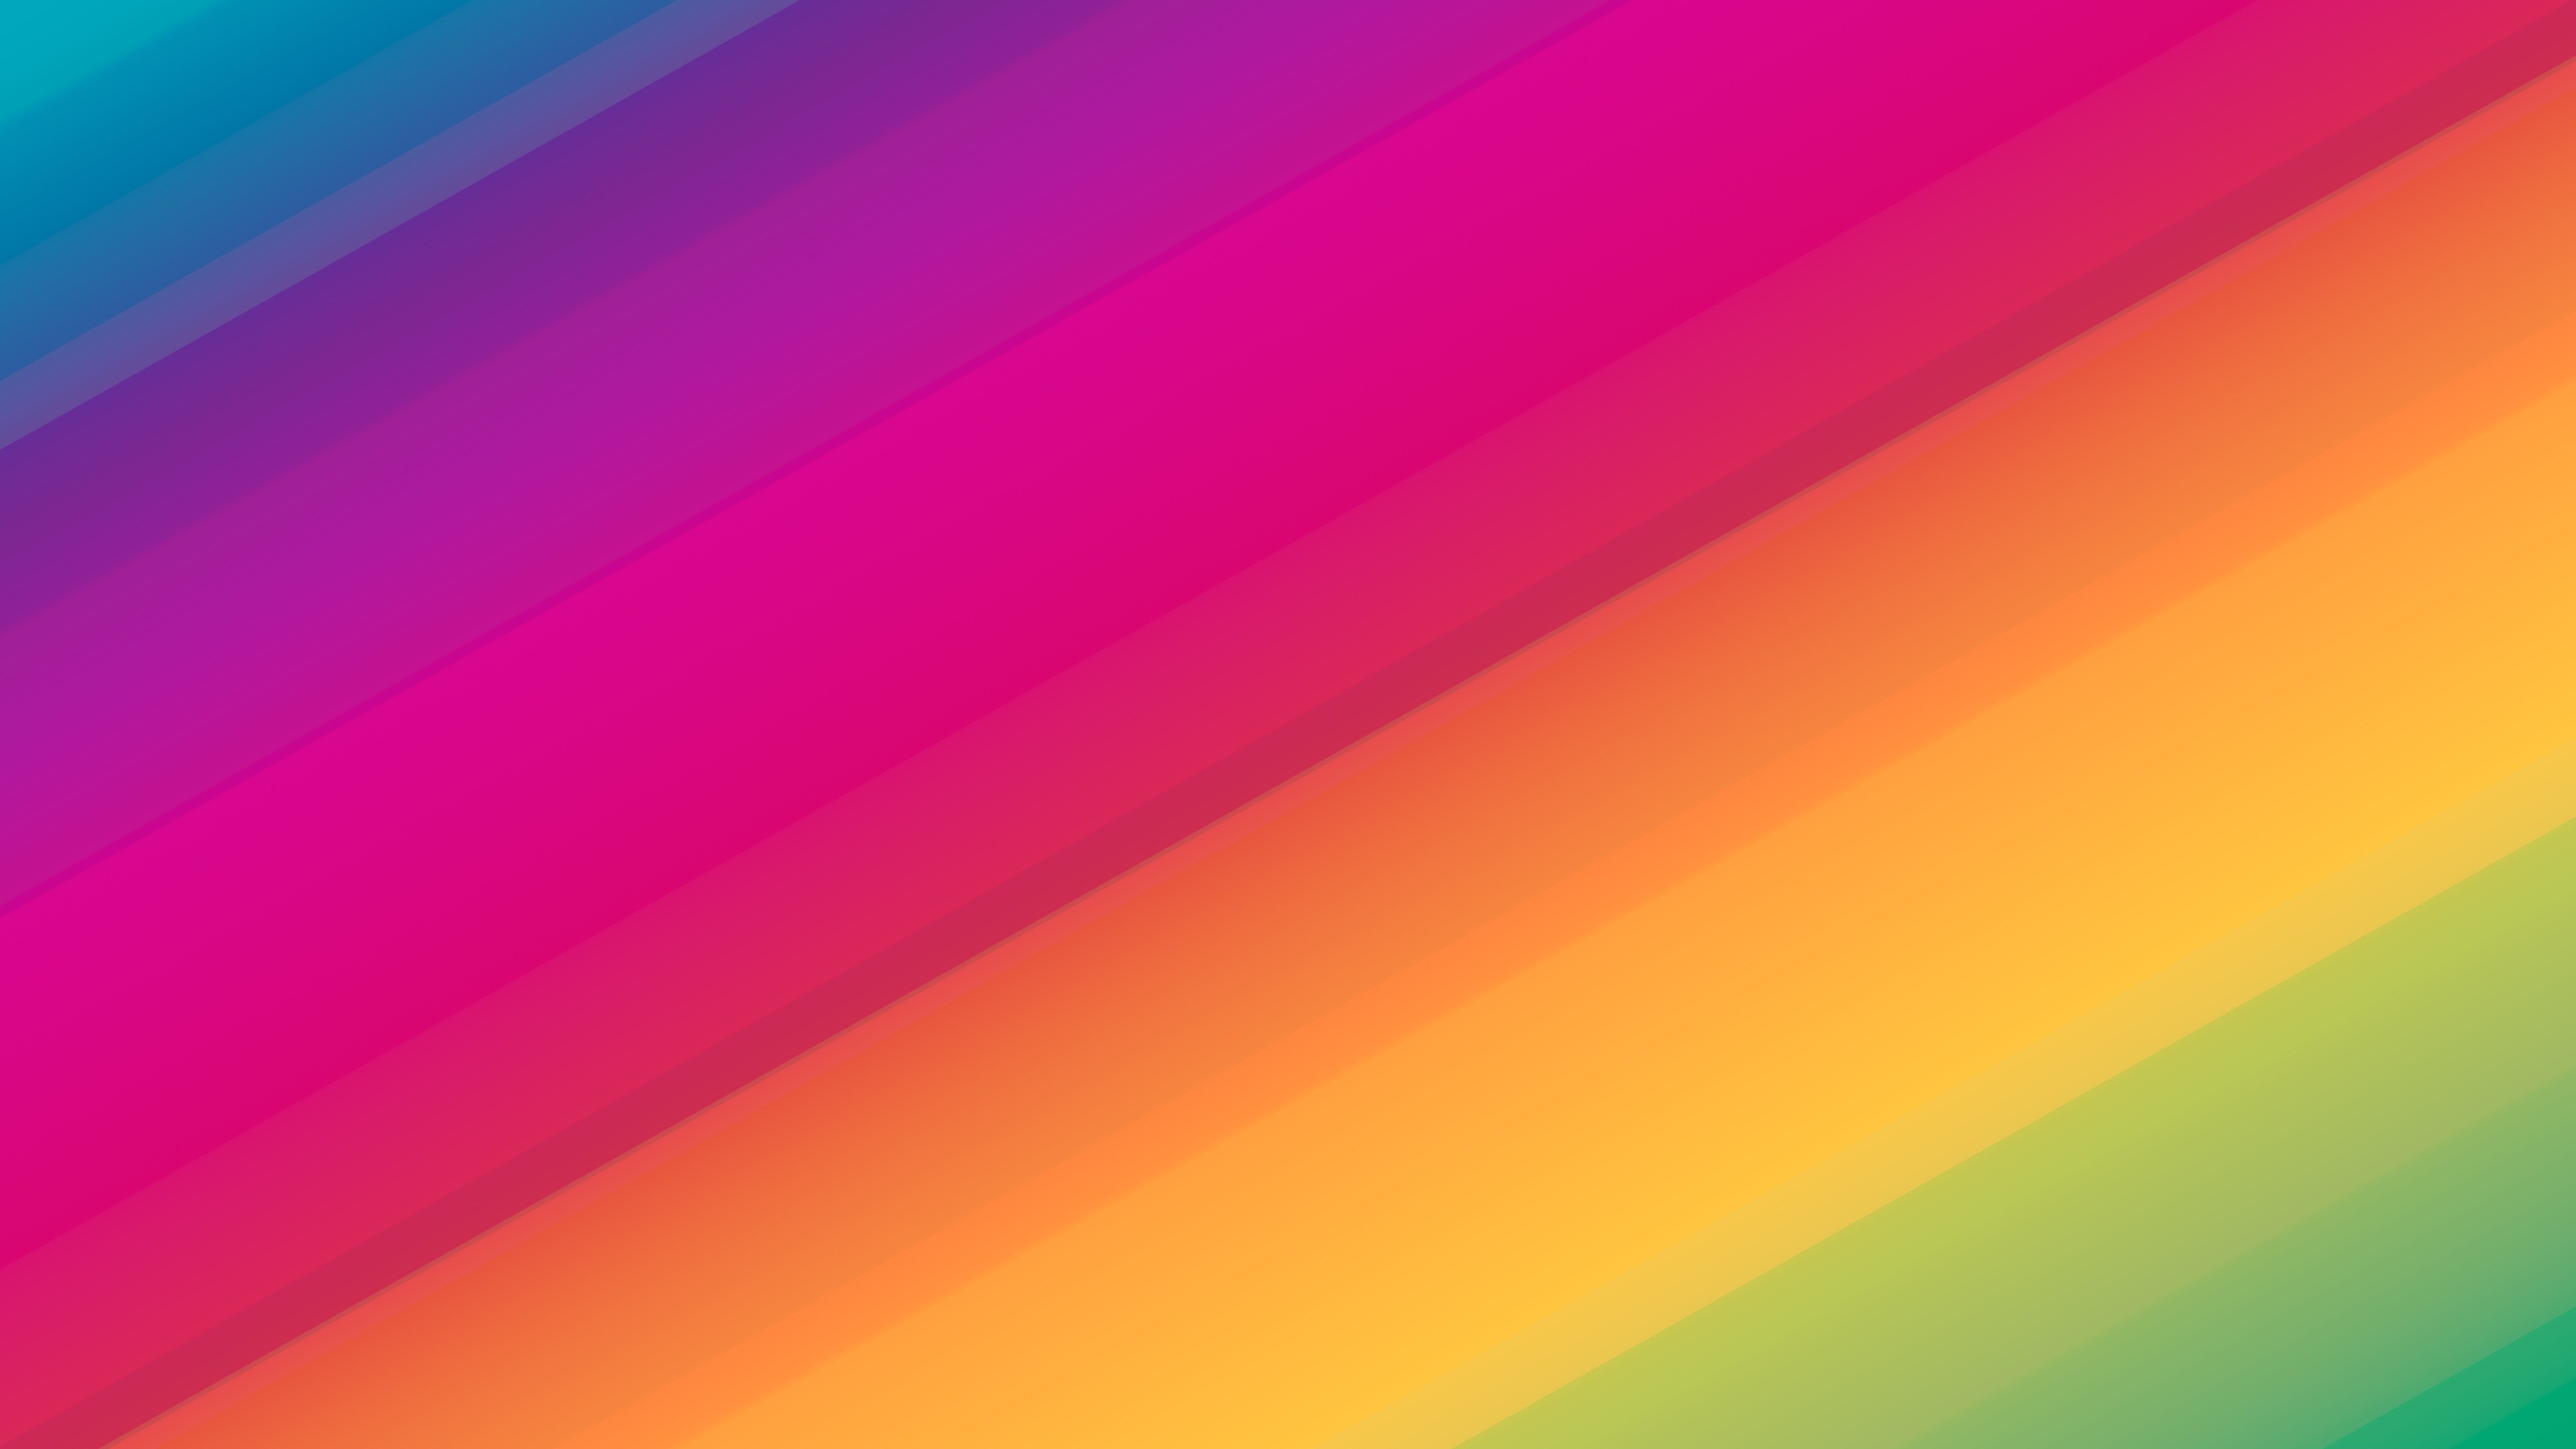 General 3840x2160 abstract diagonal lines colorful